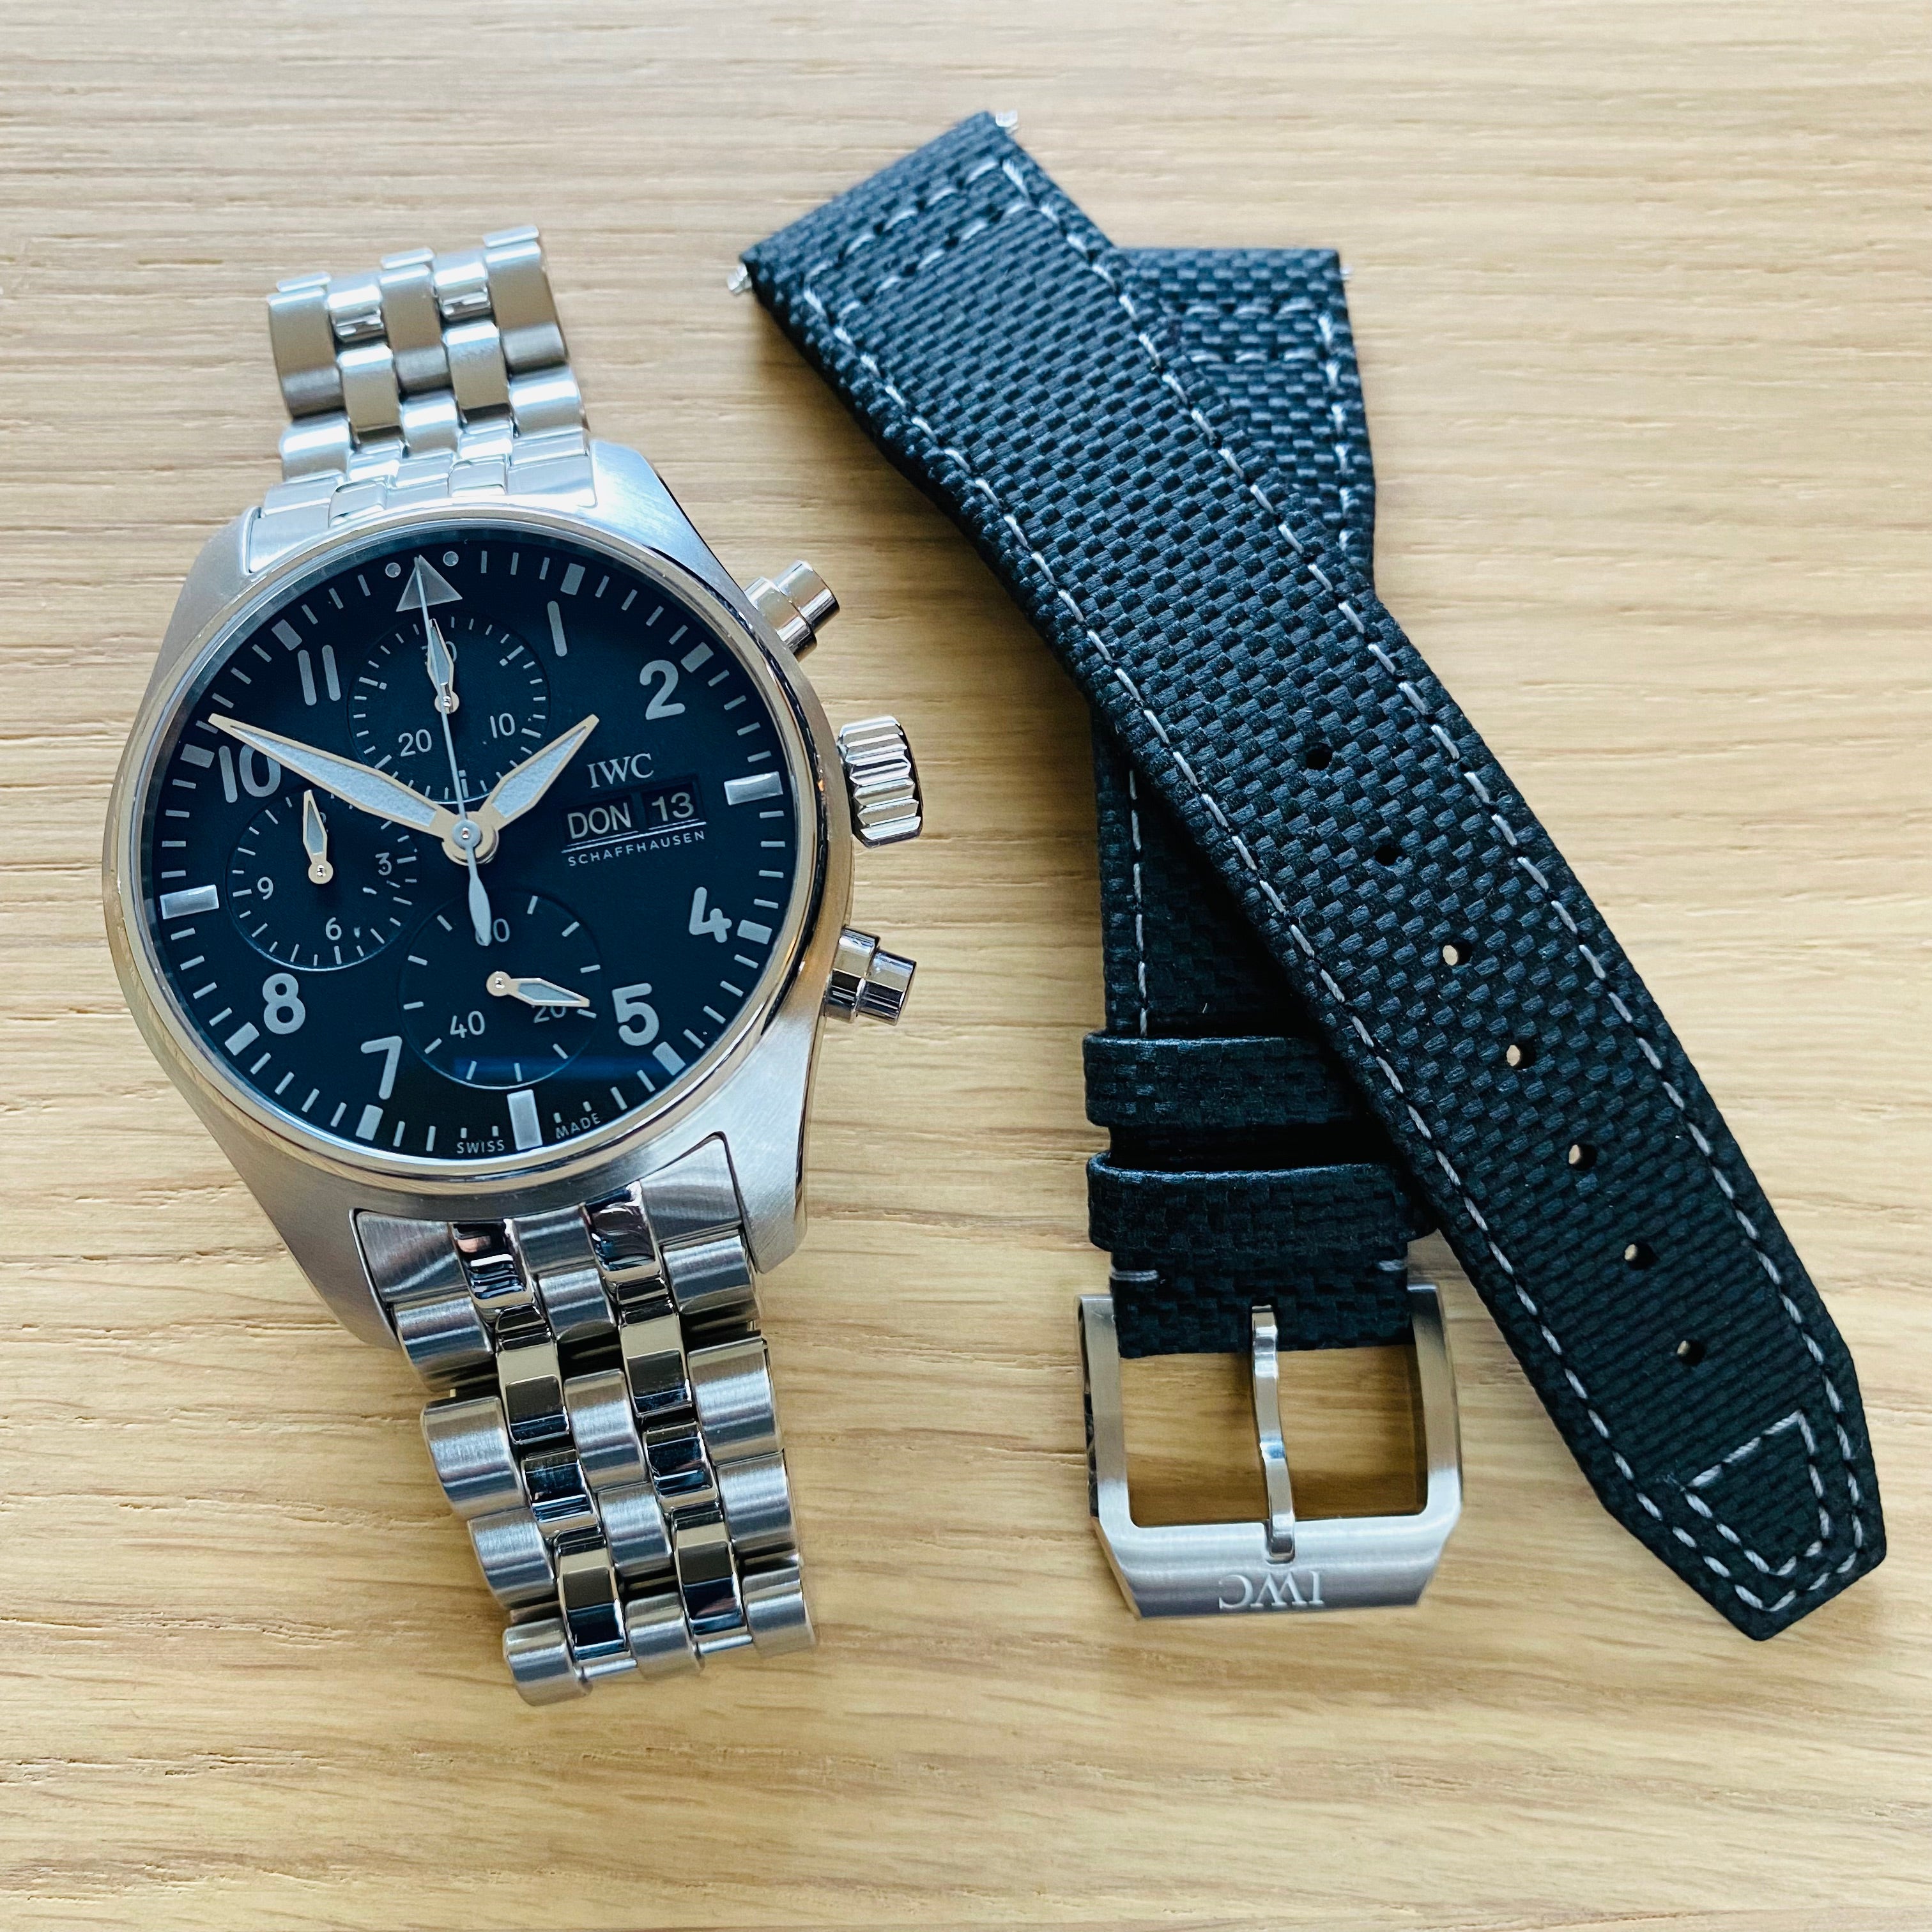 HANDSON The new IWC Mark XX and its NEW BRACELET